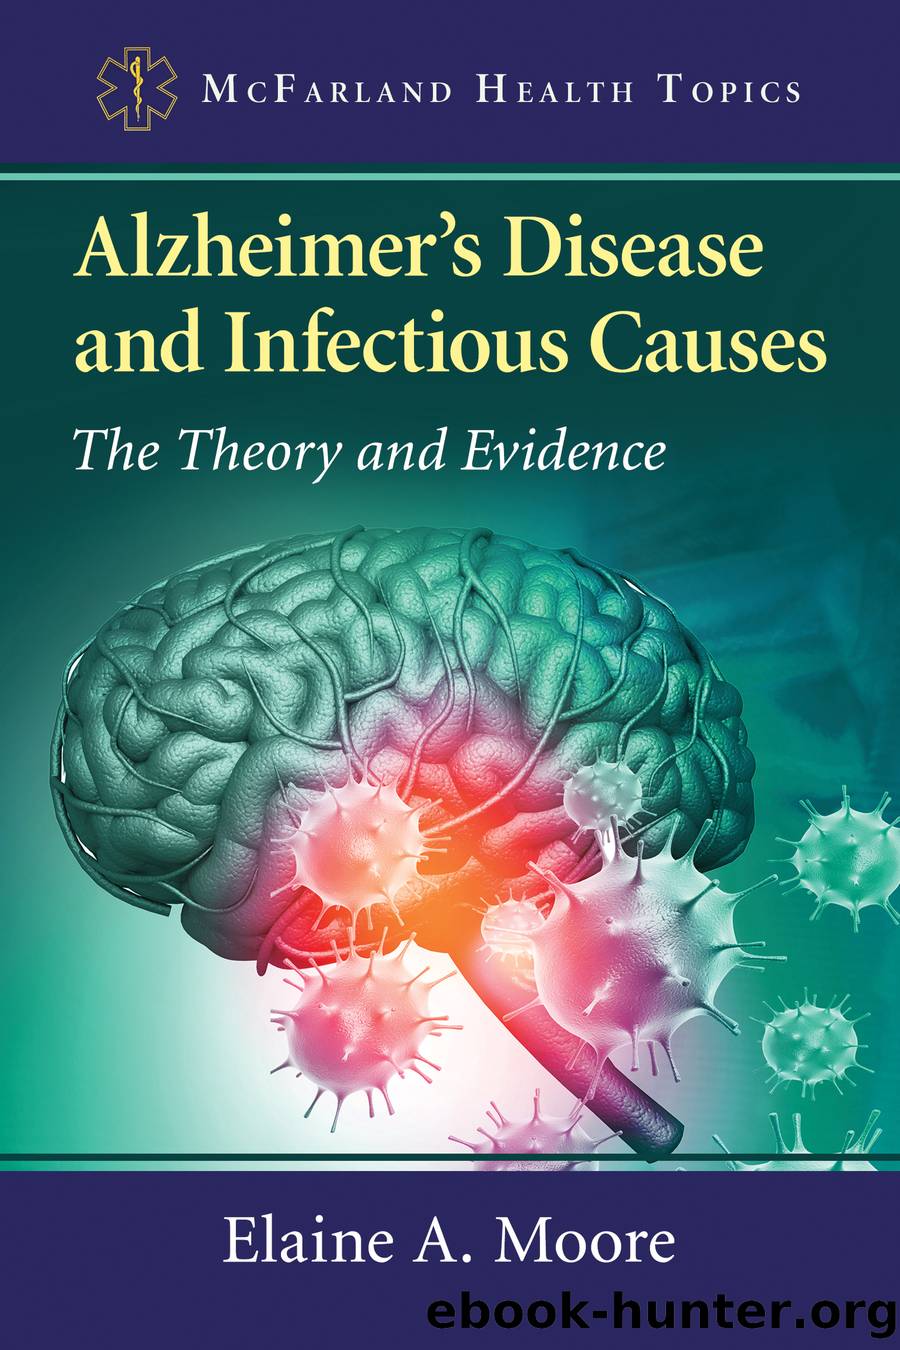 Alzheimer's Disease and Infectious Causes by Elaine A. Moore